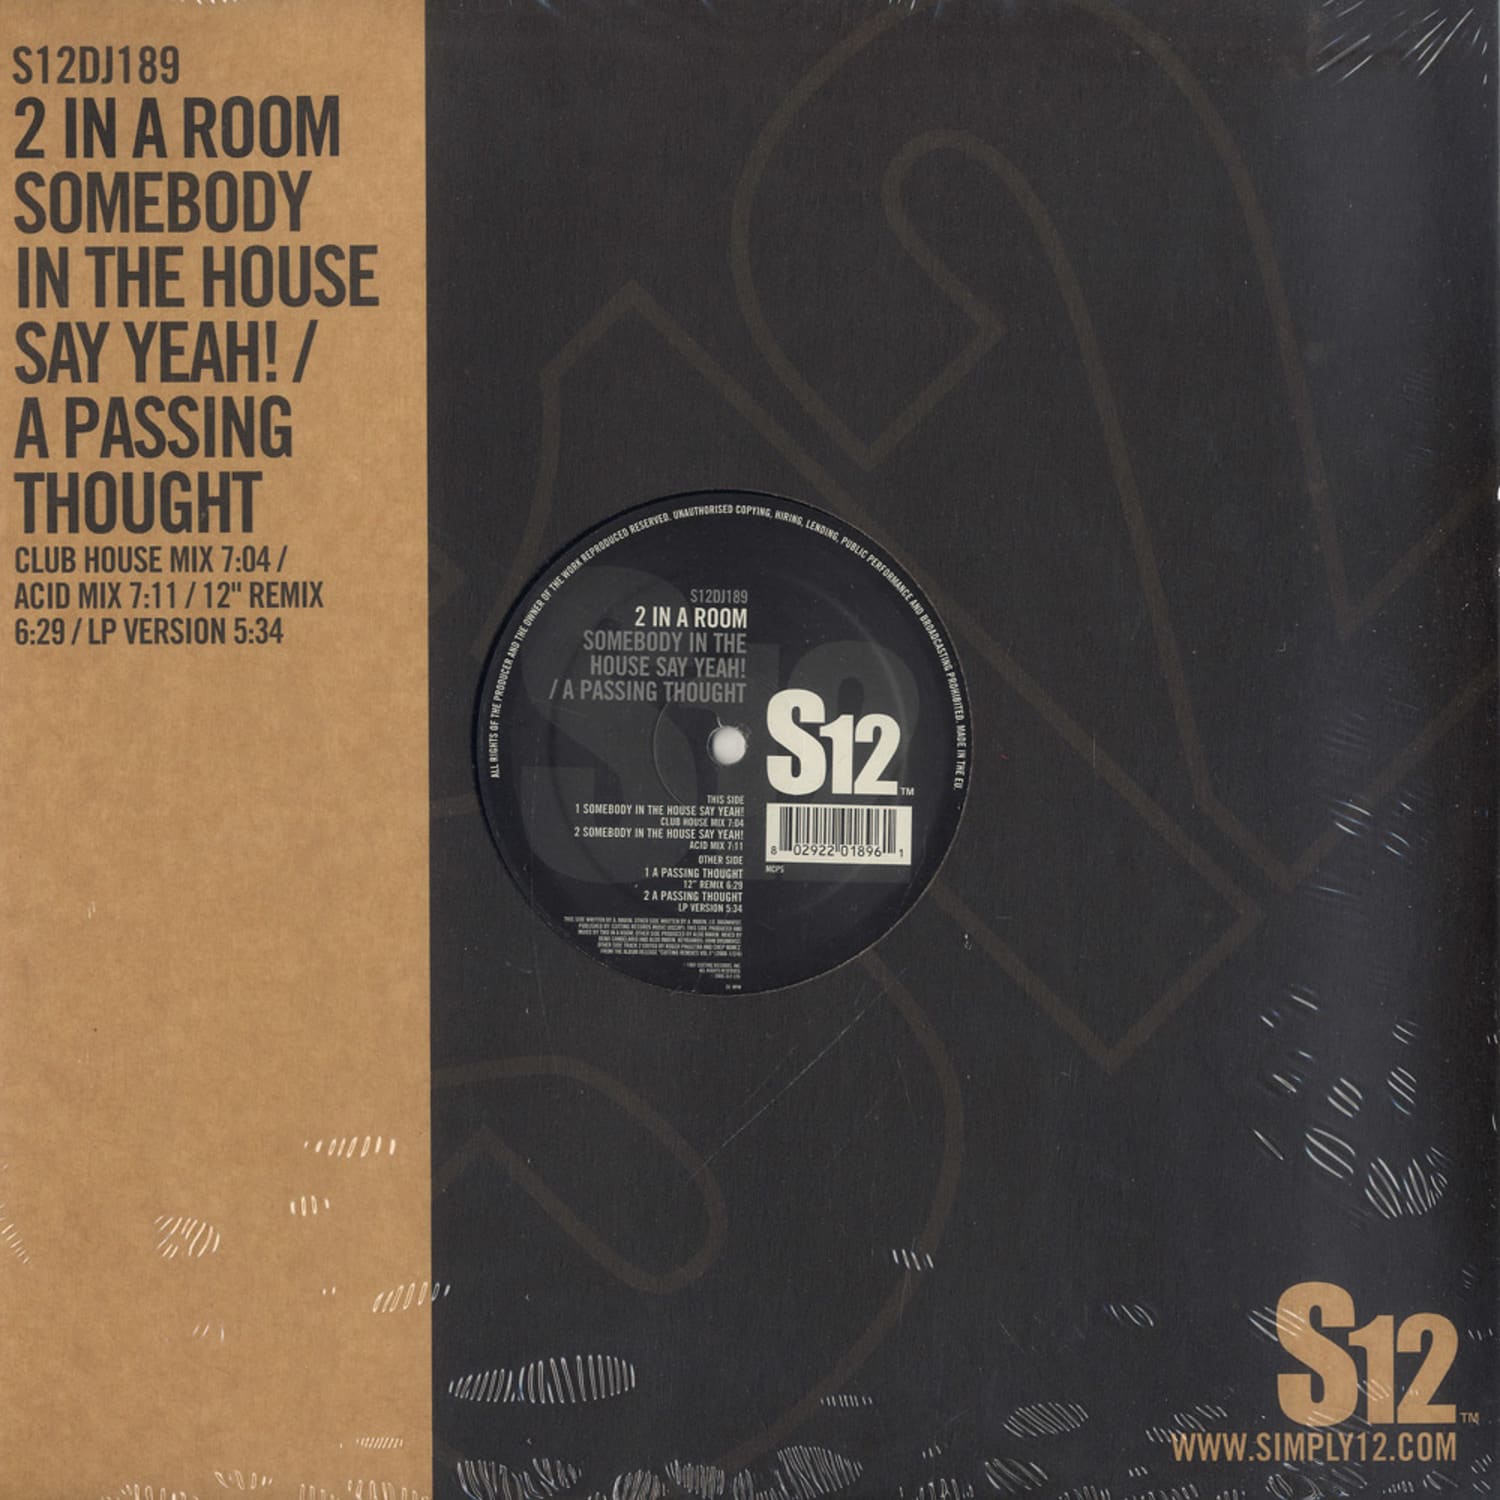 2 In A Room - SOMEBODY IN THE HOUSE SAY YEAH